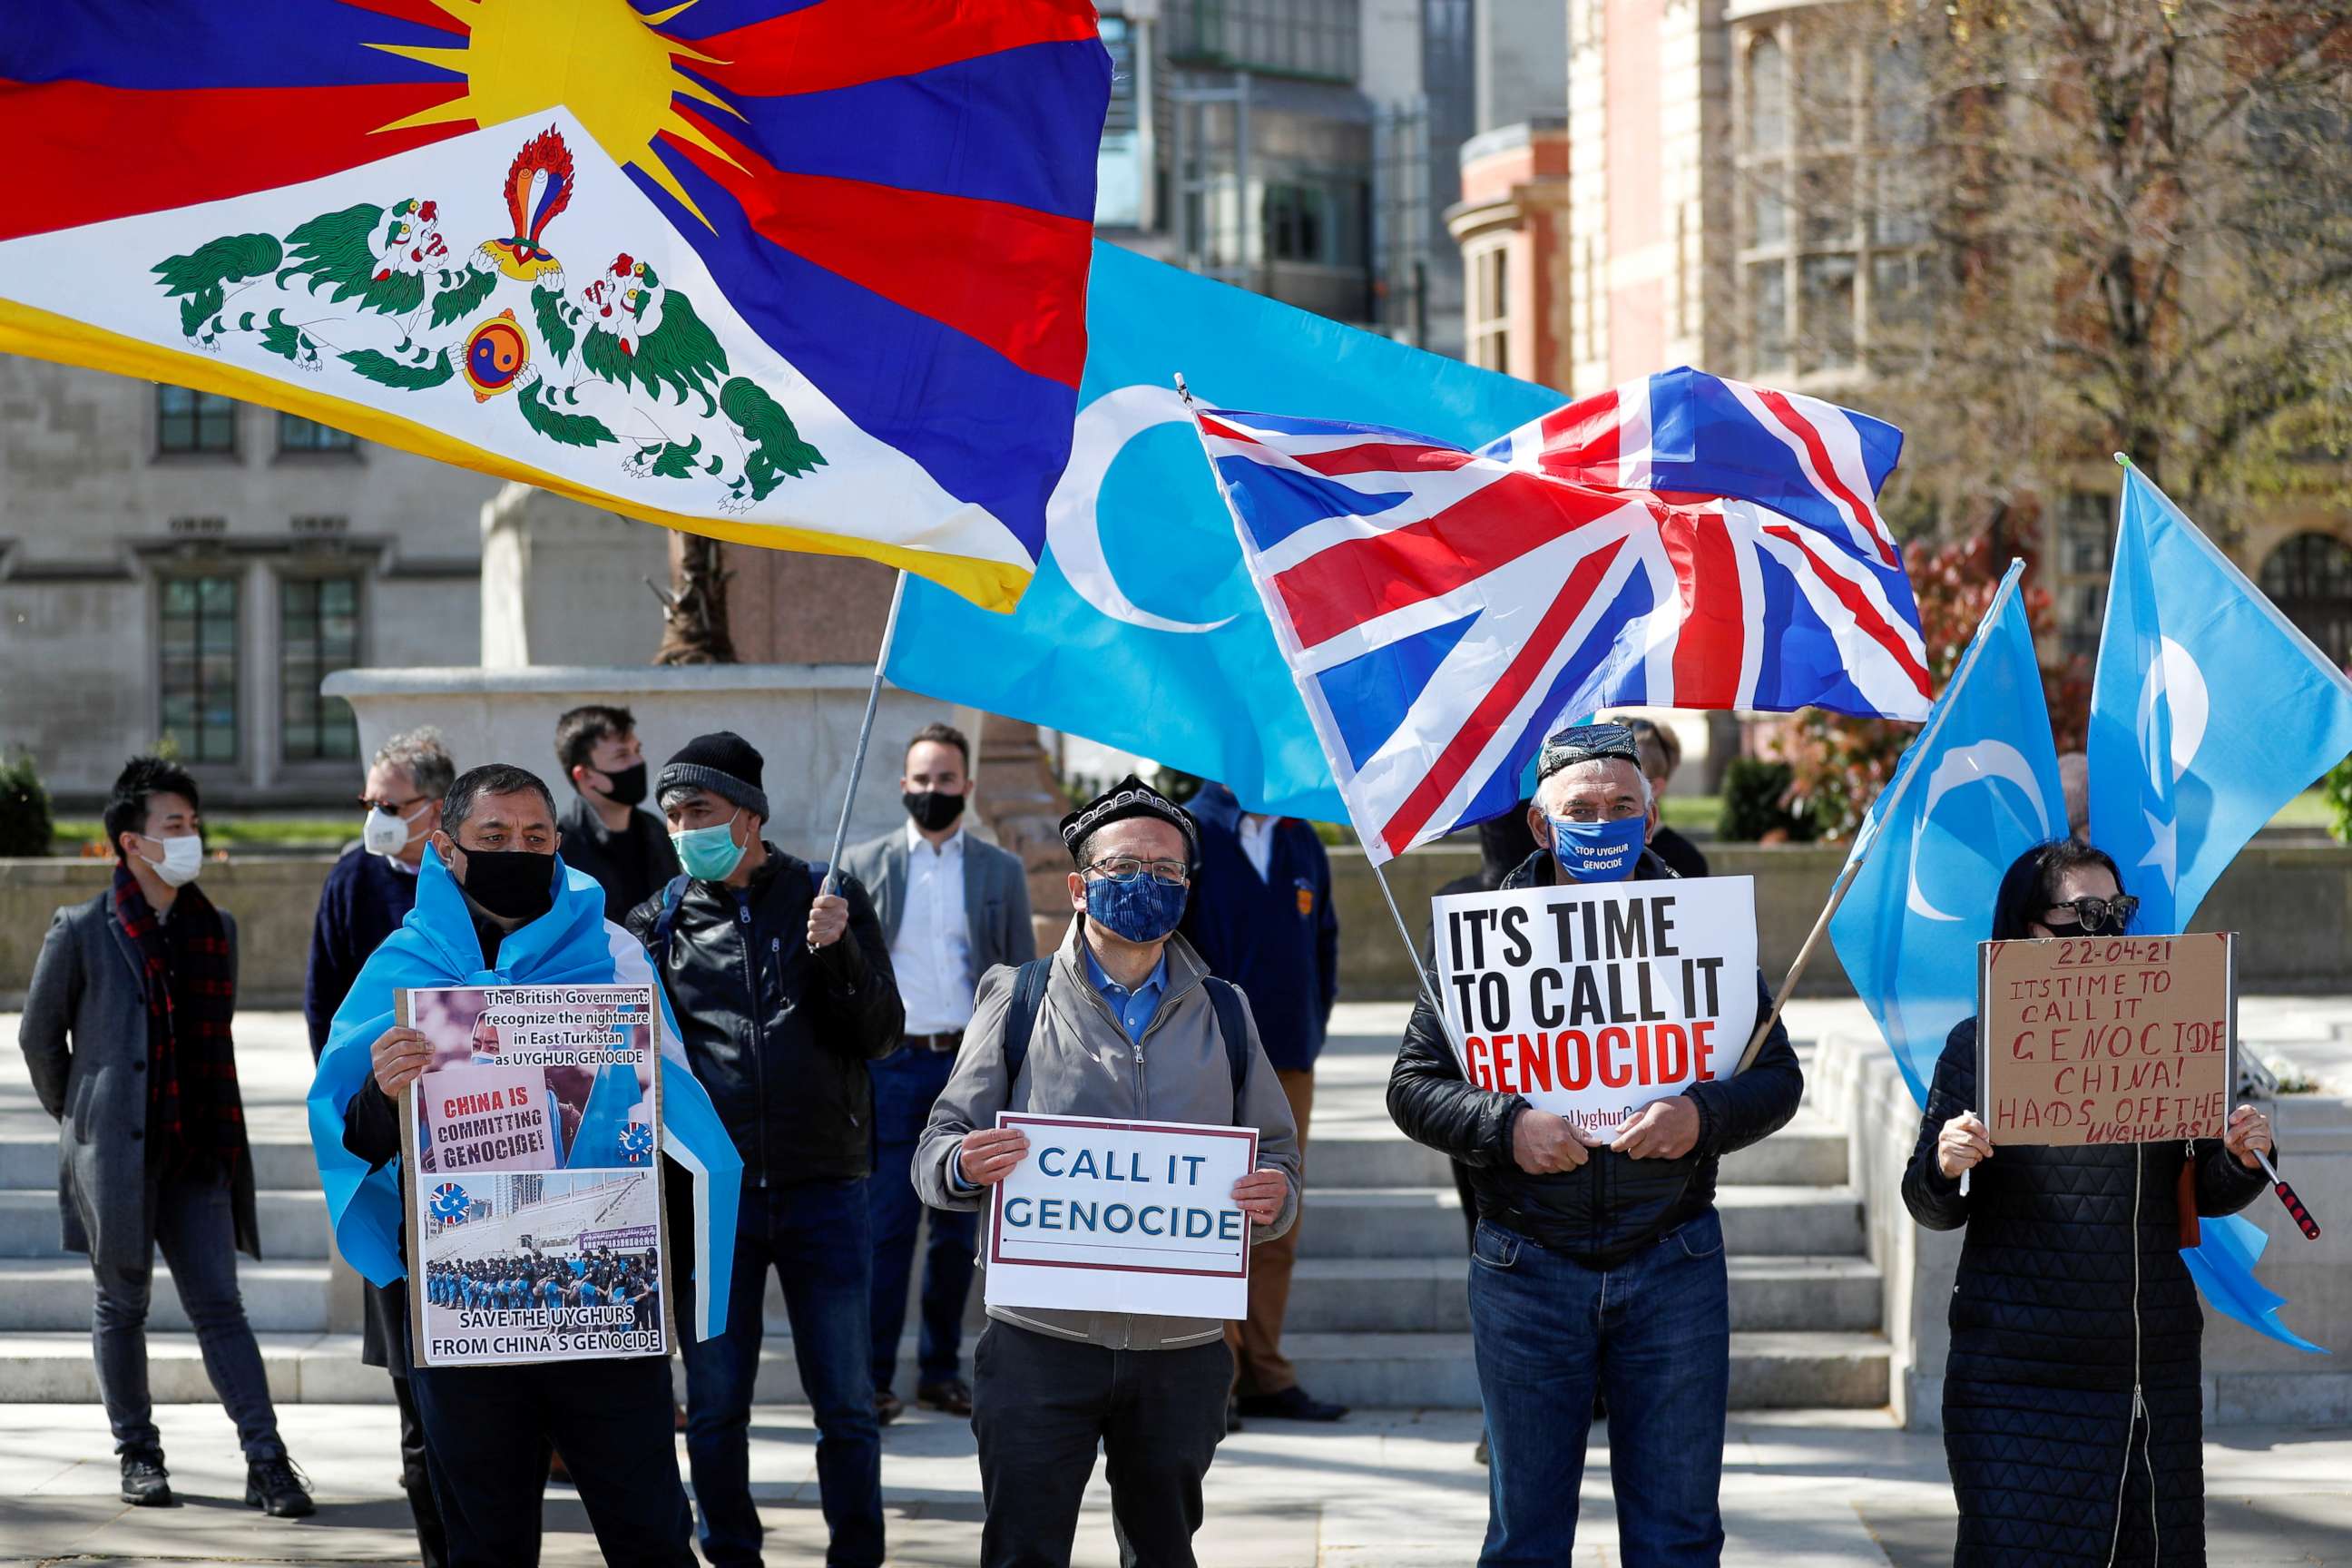 FILE PHOTO: Demonstrators hold placards during a protest against Uyghur genocide, in London, Britain April 22, 2021.